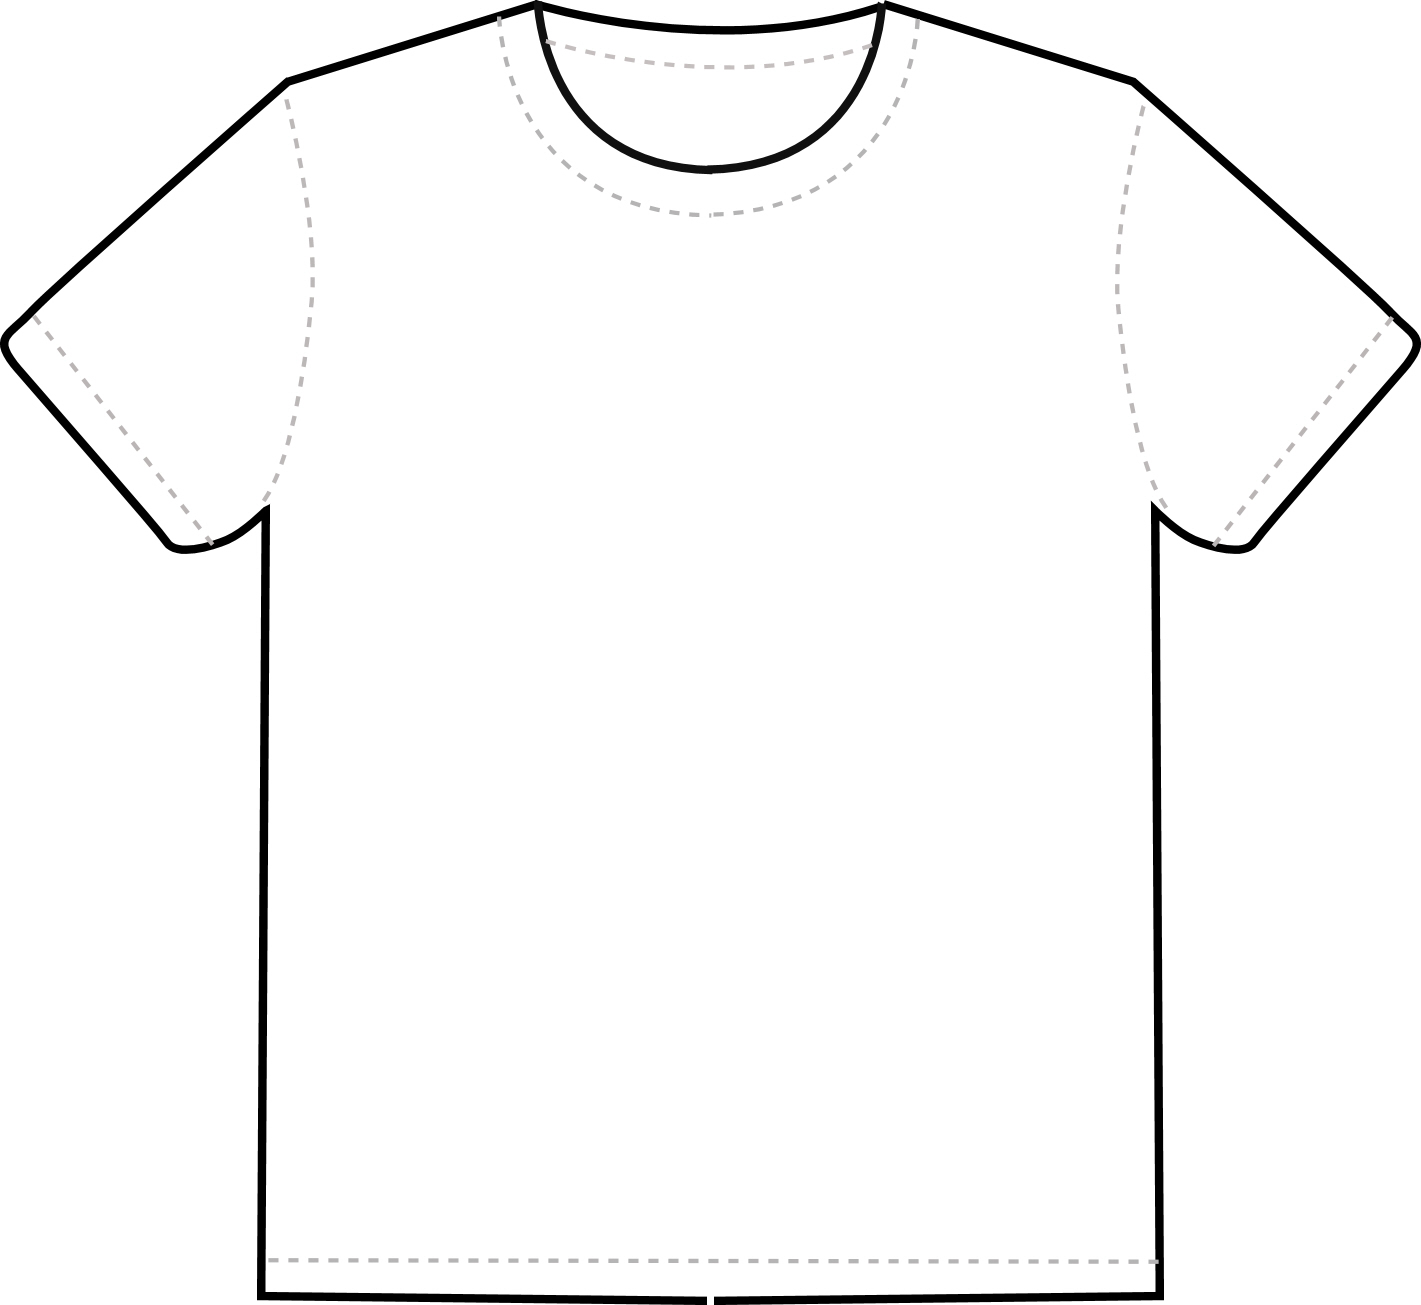 Images For > Tshirt Outline Png